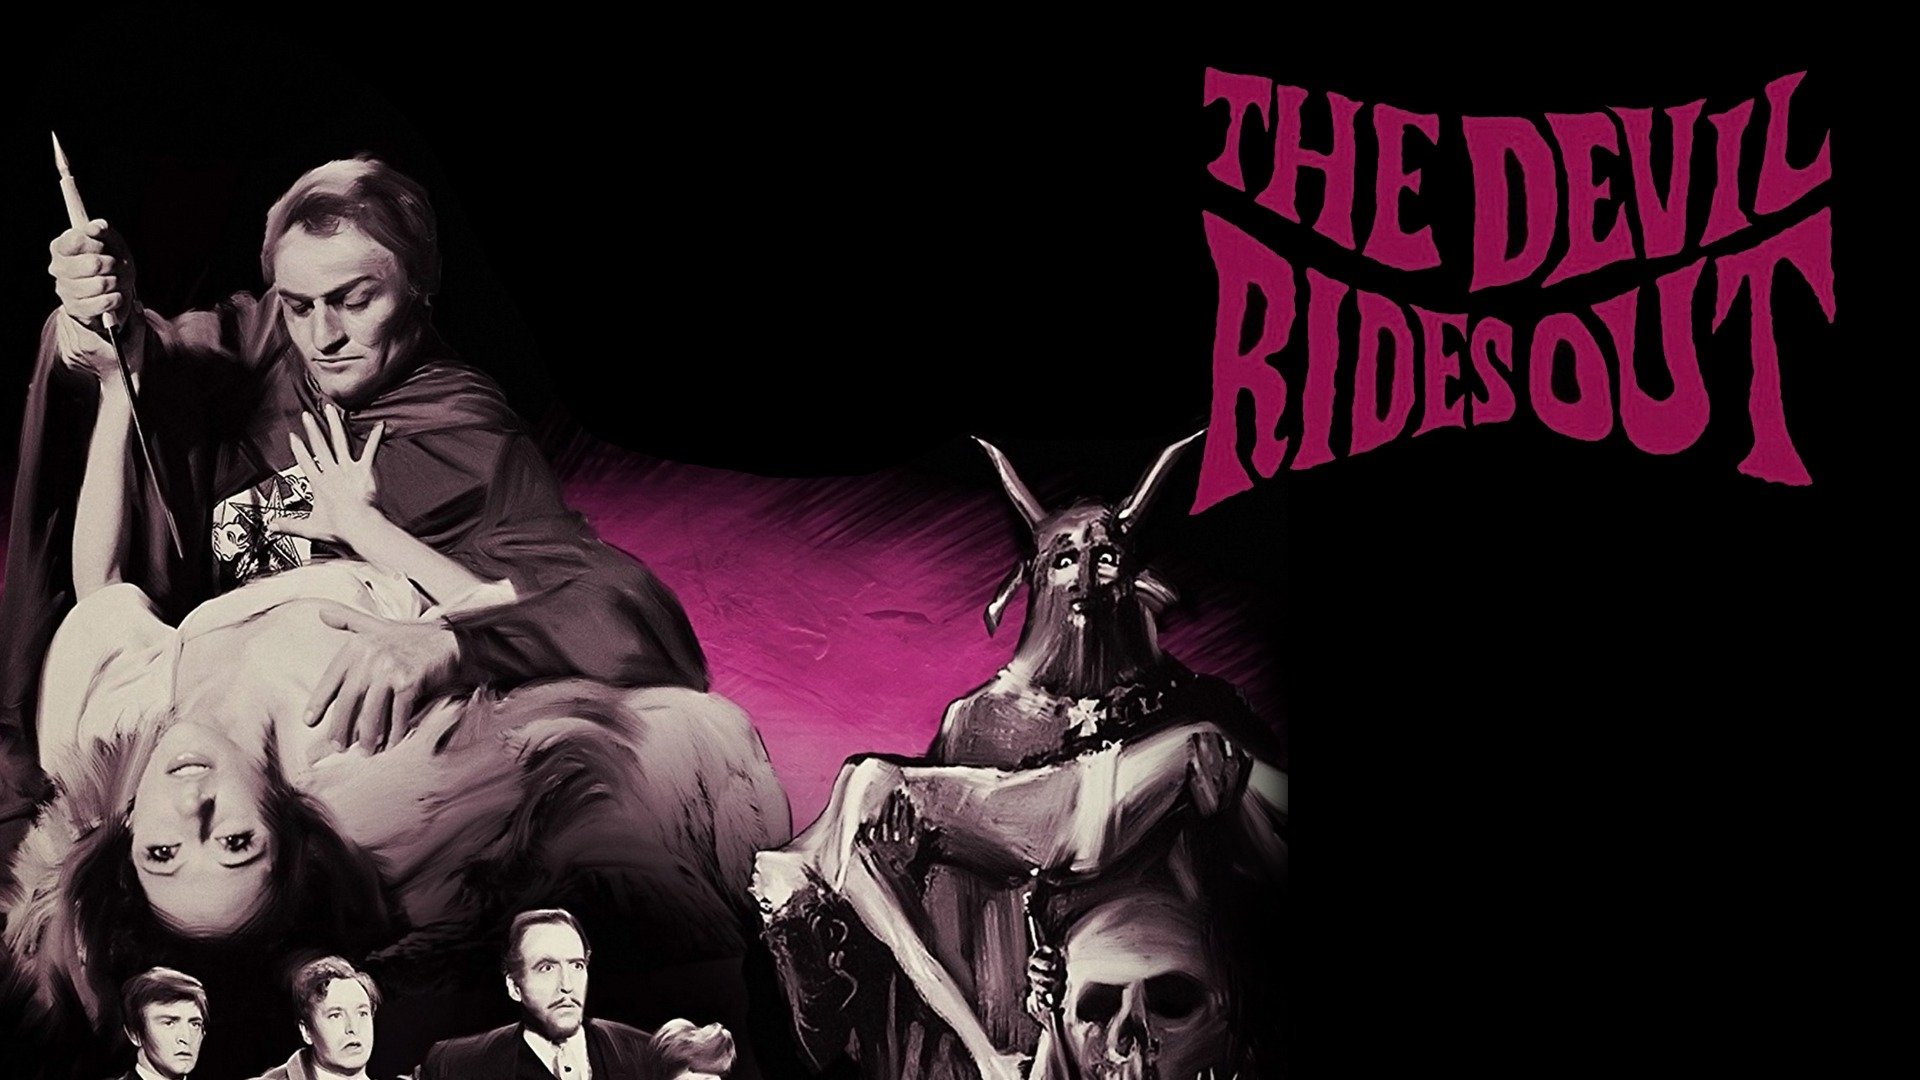 42-facts-about-the-movie-the-devil-rides-out